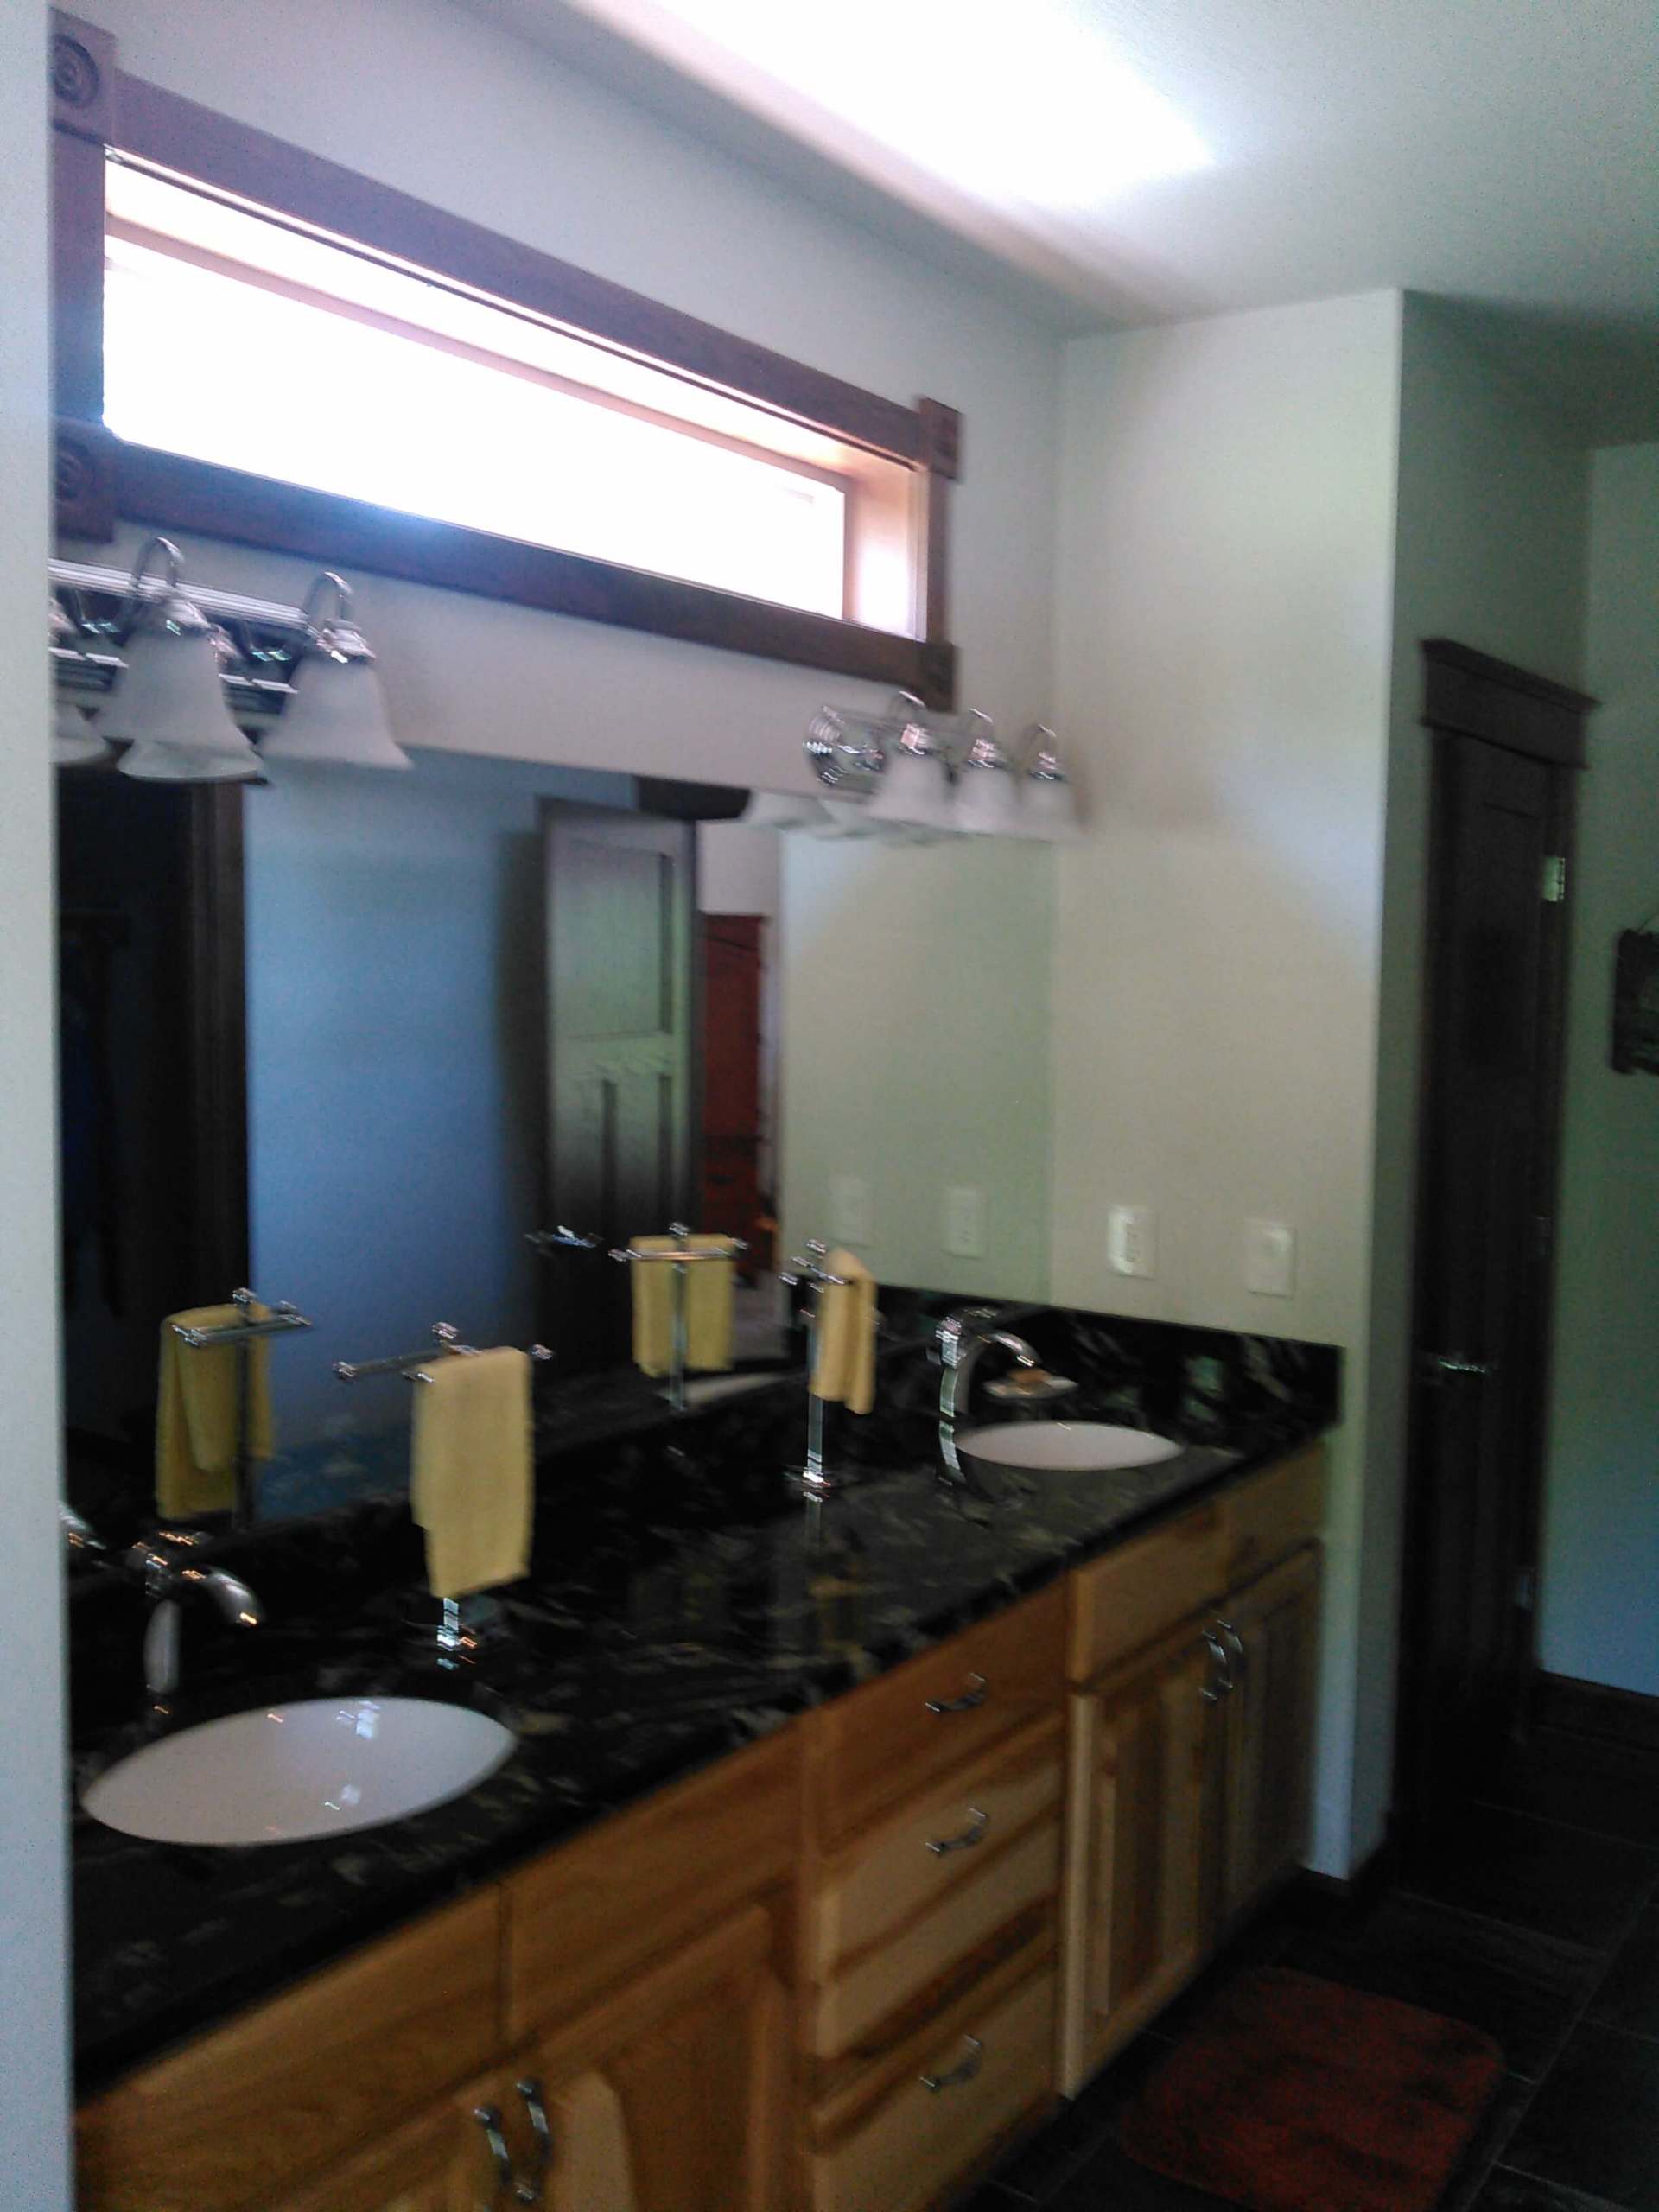 Bathroom side view -  Remodeling Services in Slippery Rock, PA